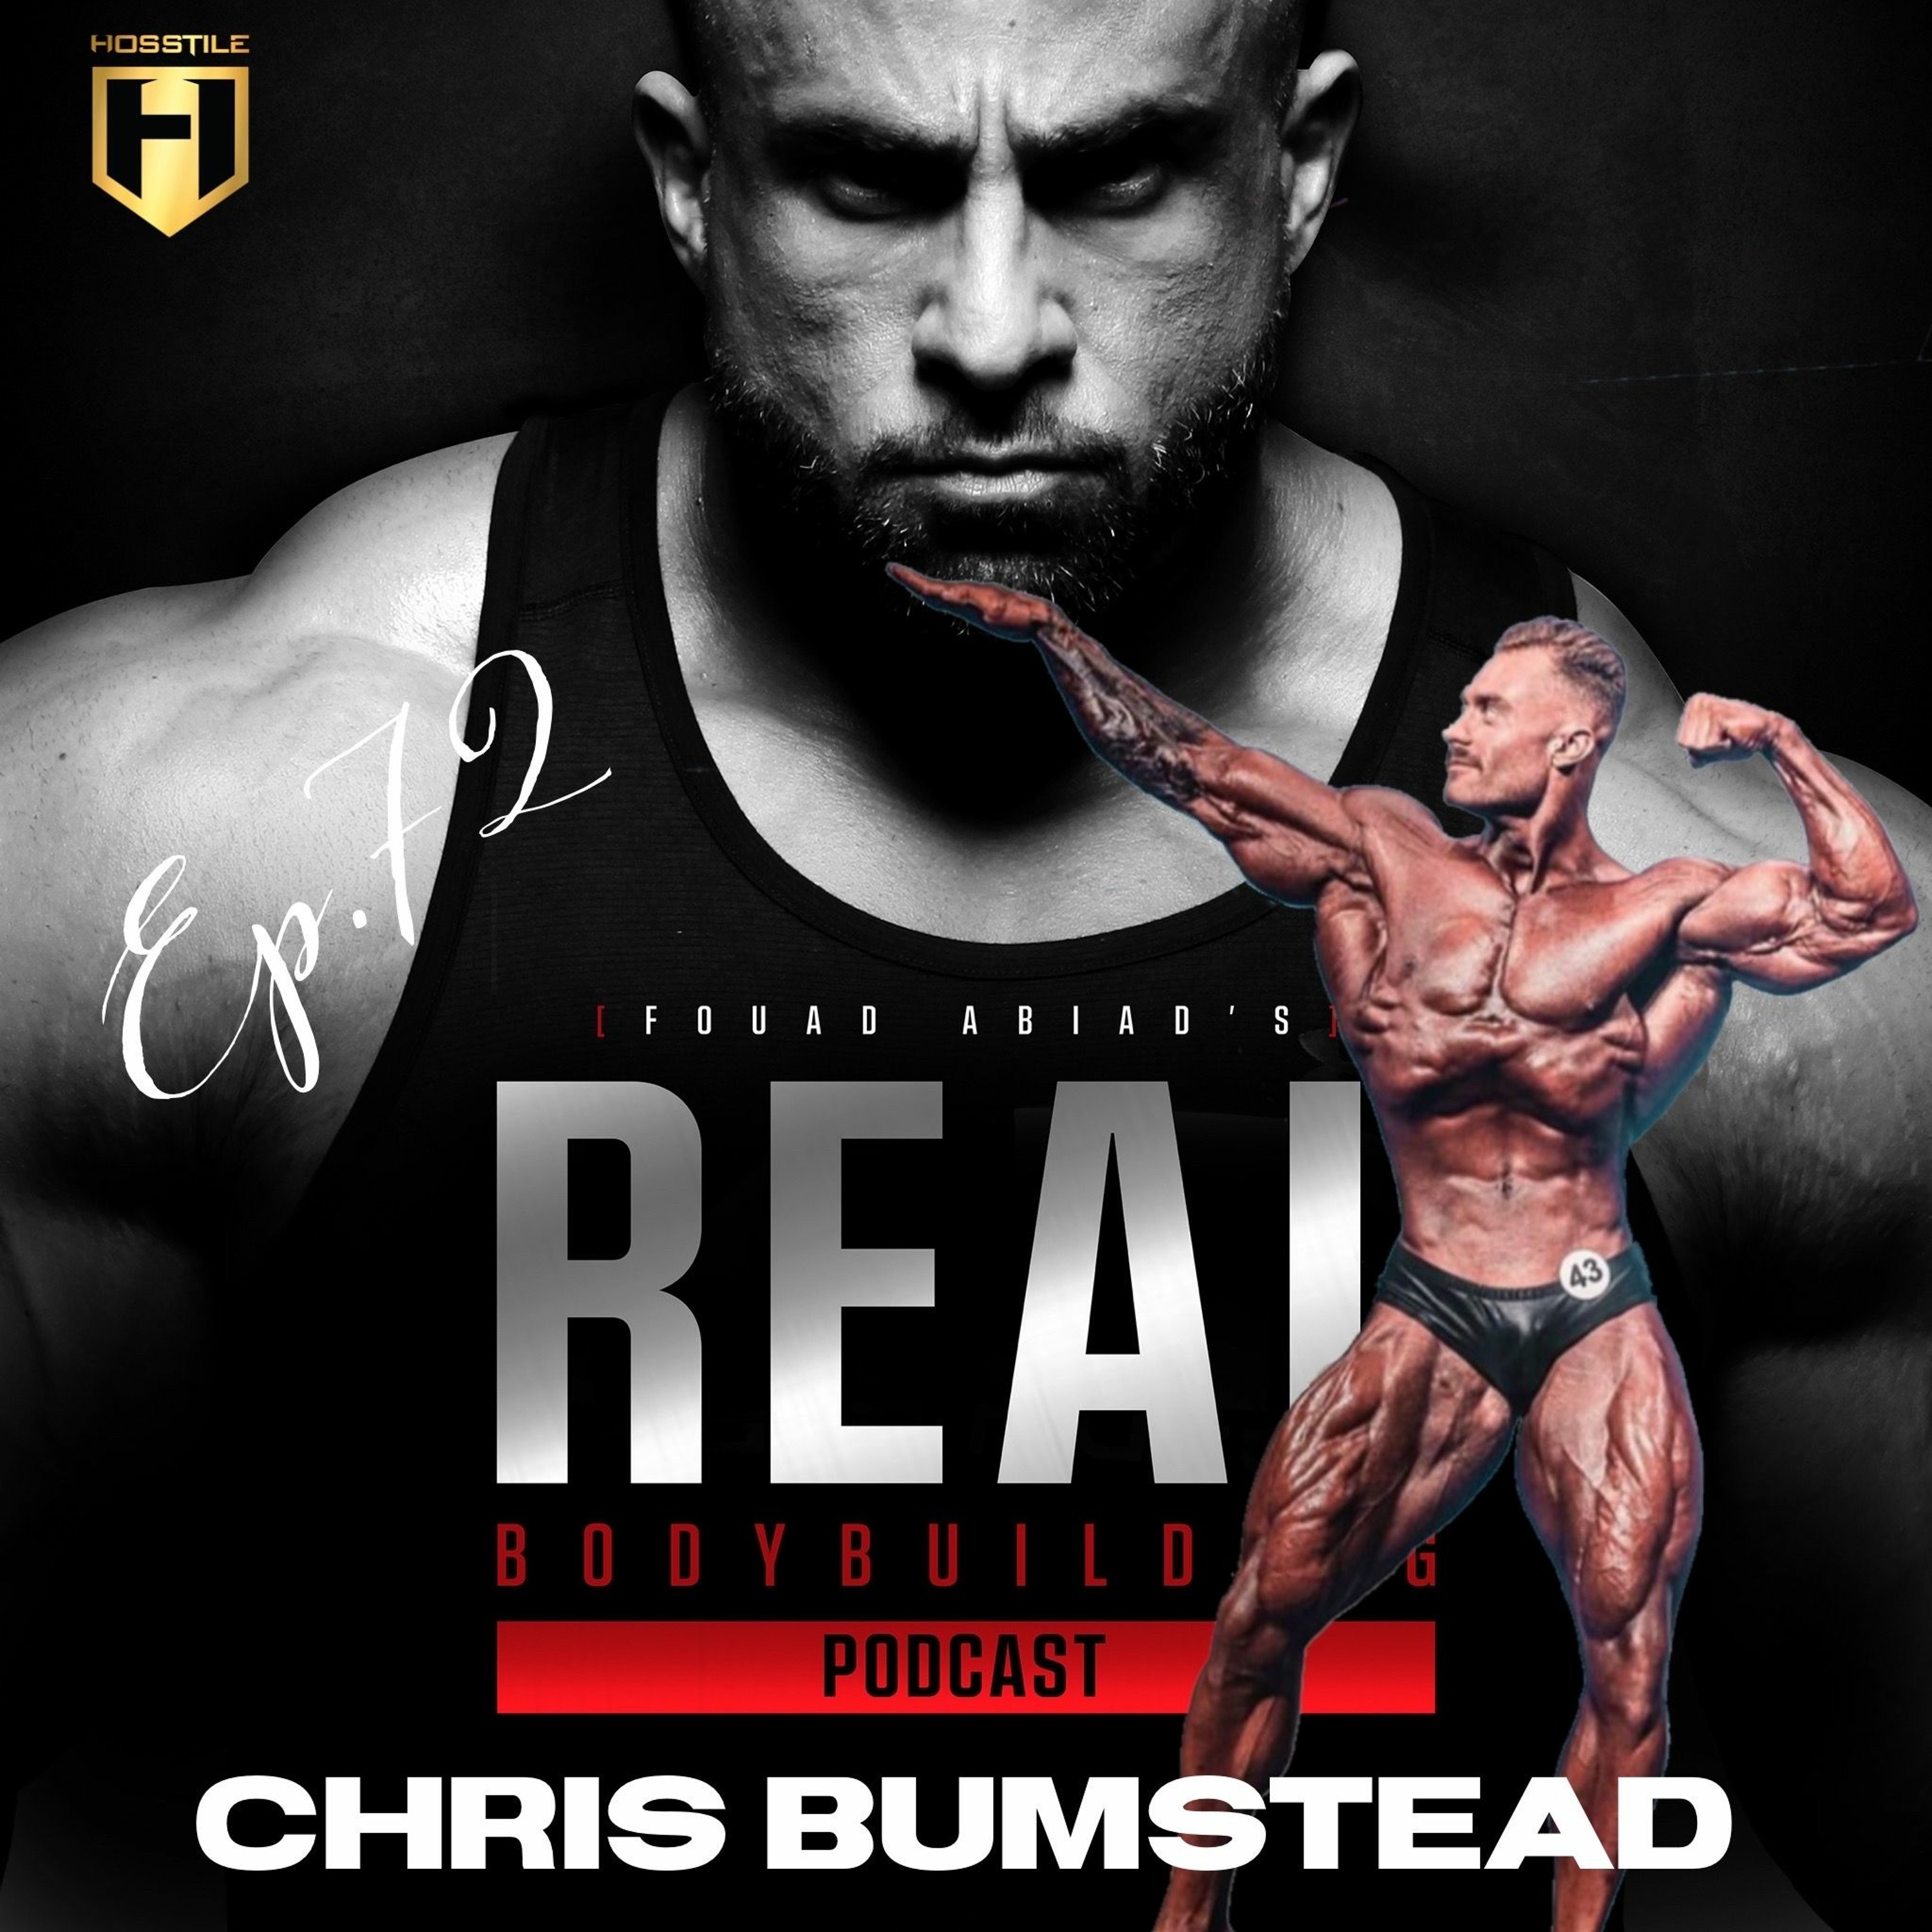 How Chris Bumstead Trains His Arms With FST-7?